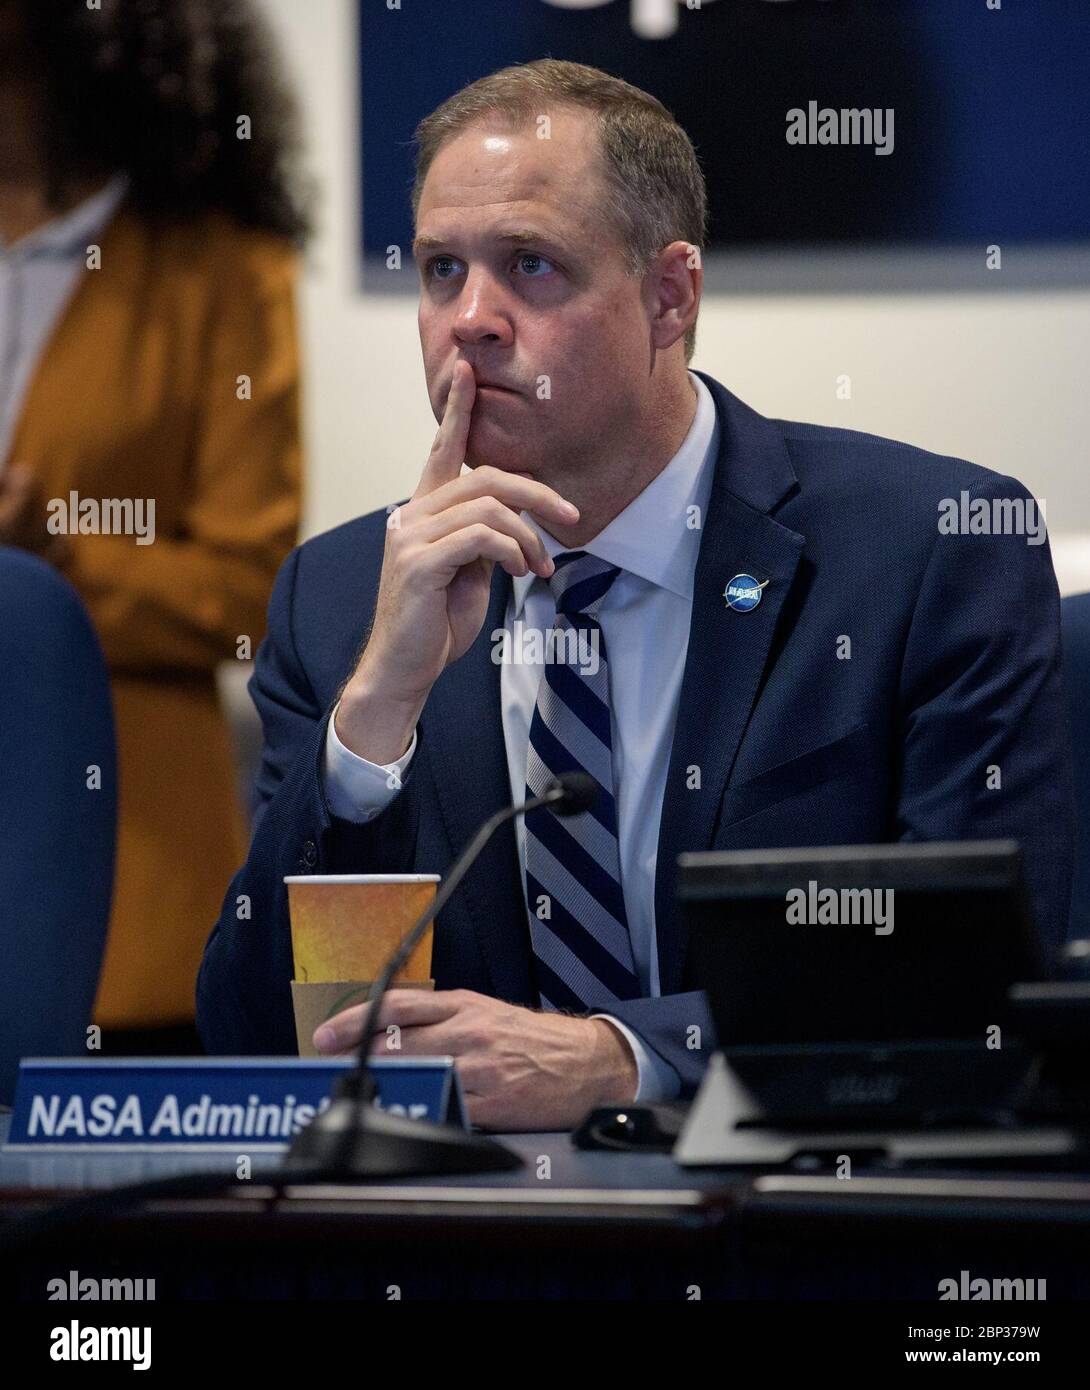 NASA Leadership and Members of Congress watch First All-Woman Spacewalk  NASA Administrator Jim Bridenstine is seen as he watches the beginning of the first all-woman spacewalk on Friday, Oct. 18, 2019, from the Space Operations Center at NASA Headquarters in Washington. The first all-woman spacewalk in history began at 7:38am EDT with NASA astronauts Christina Koch and Jessica Meir venturing outside the International Space Station to replace a failed battery charge-discharge unit. This is the fourth spacewalk for Koch and Meir’s first. Stock Photo